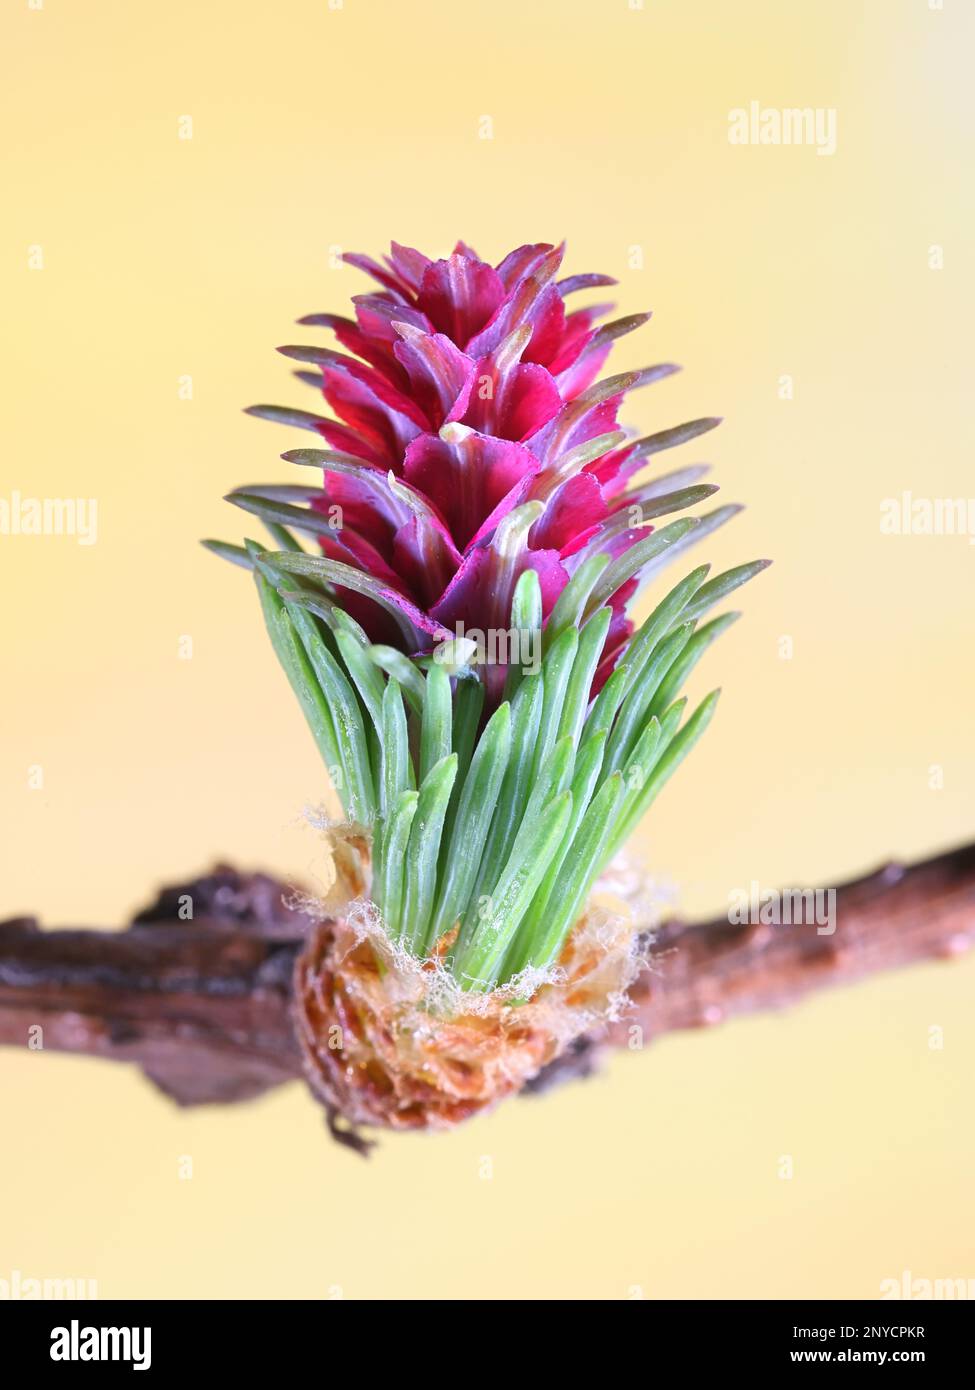 Female cones of Larix sibirica, known as the Siberian larch or Russian larch, blooming in April Stock Photo